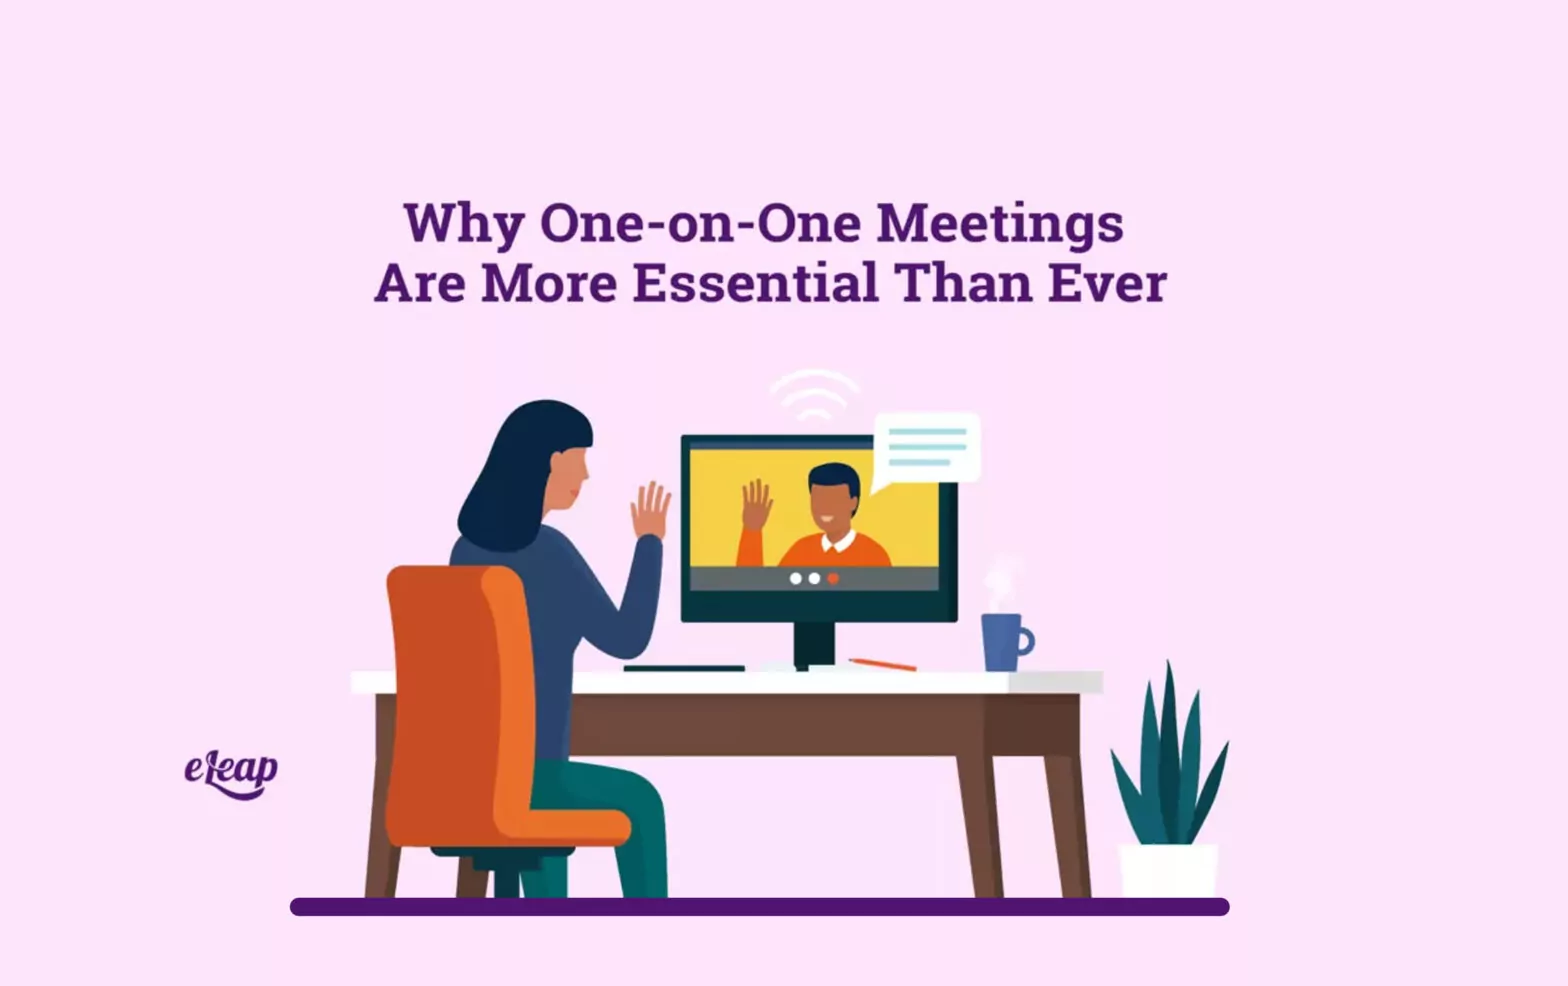 Why One-on-One Meetings Are More Essential Than Ever